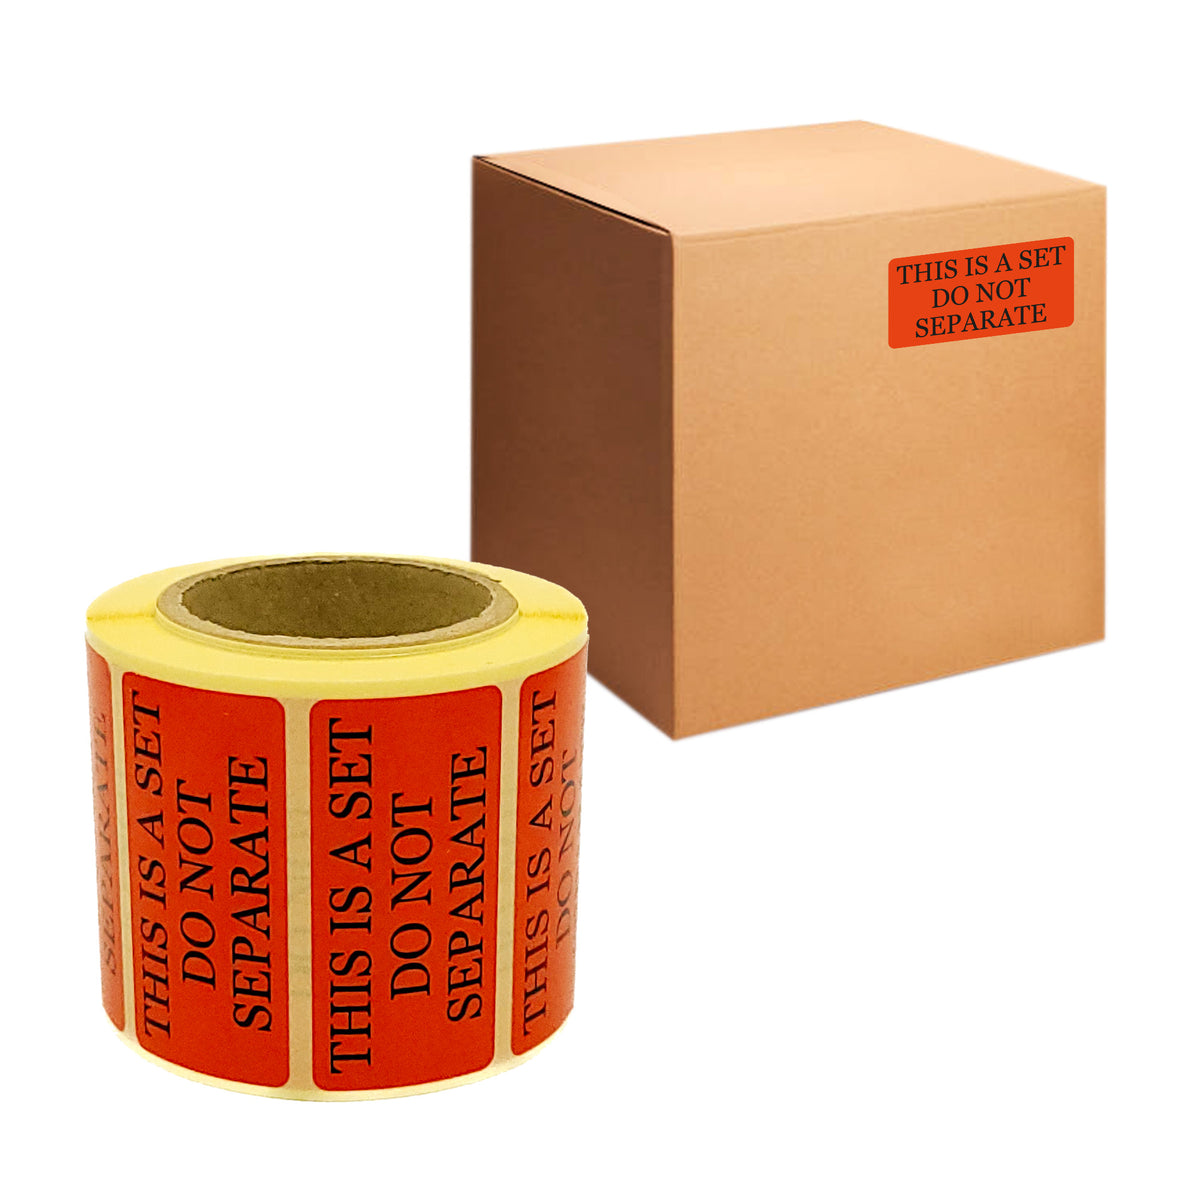 Warning Labels on Roll 50x25 mm- THIS IS A SET- DO NOT SEPARATE! 500 pcs